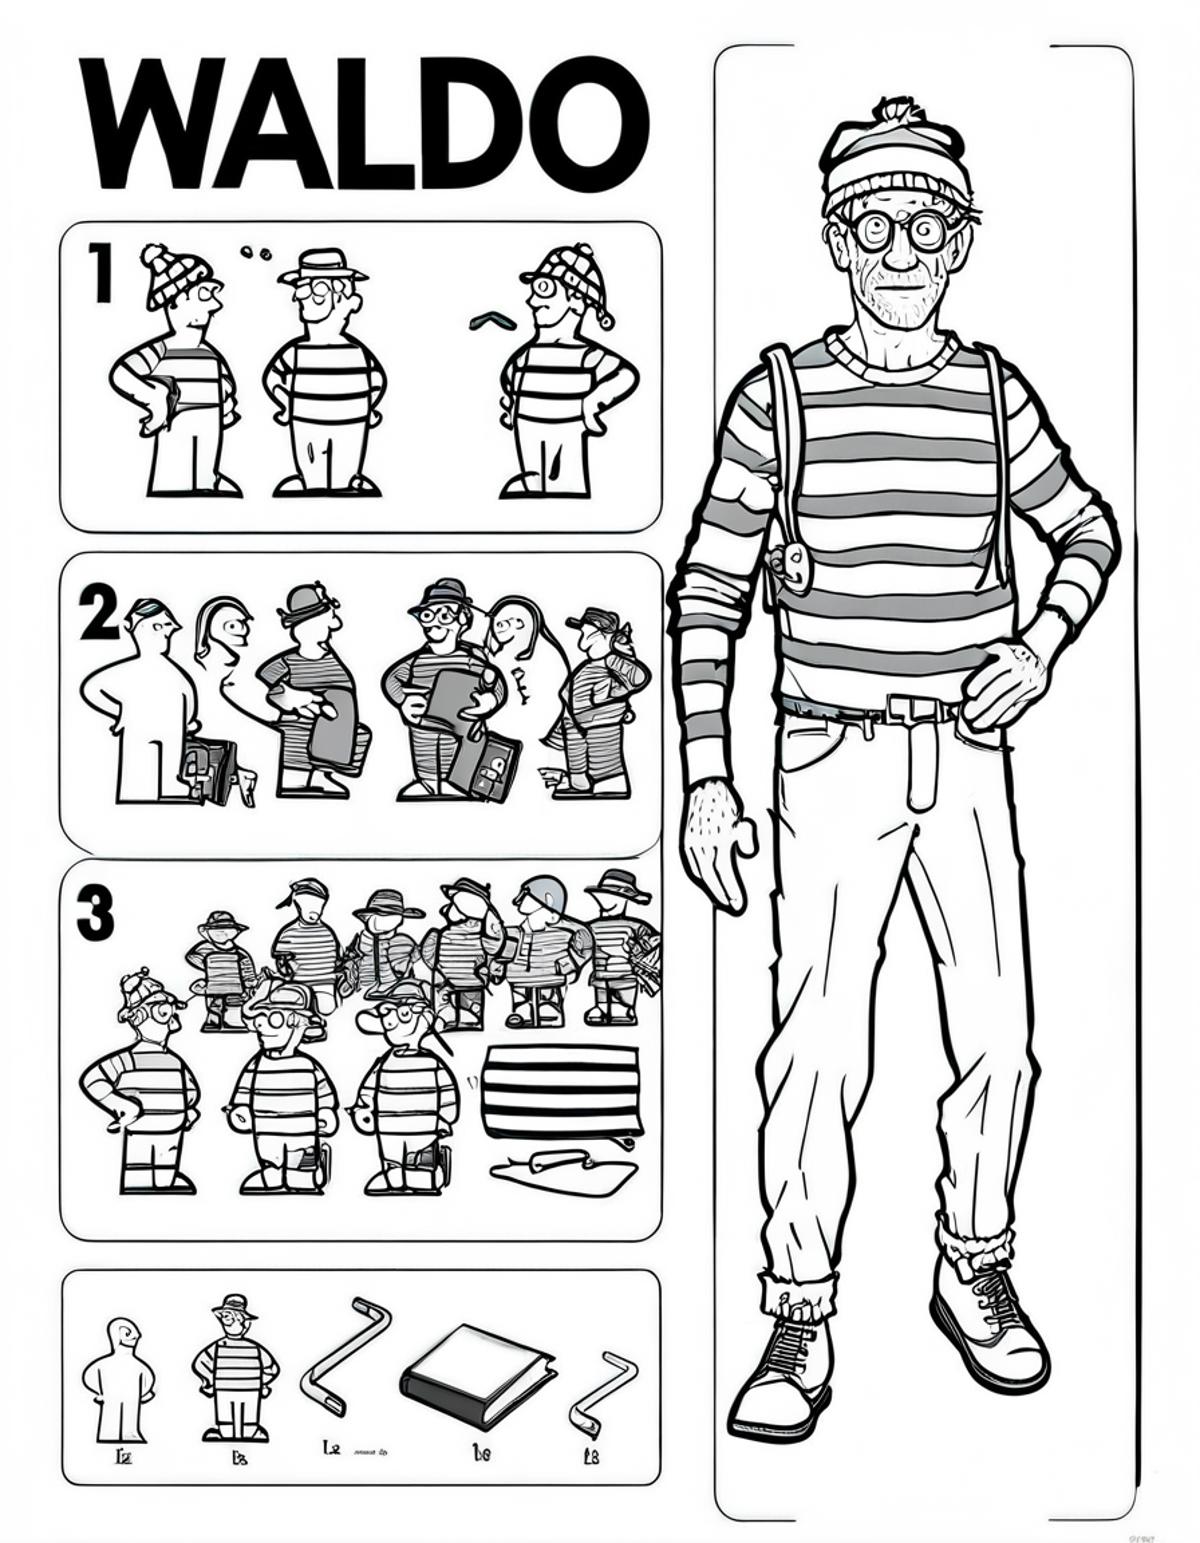 A colorful comic strip of Waldo standing in front of other cartoon characters.